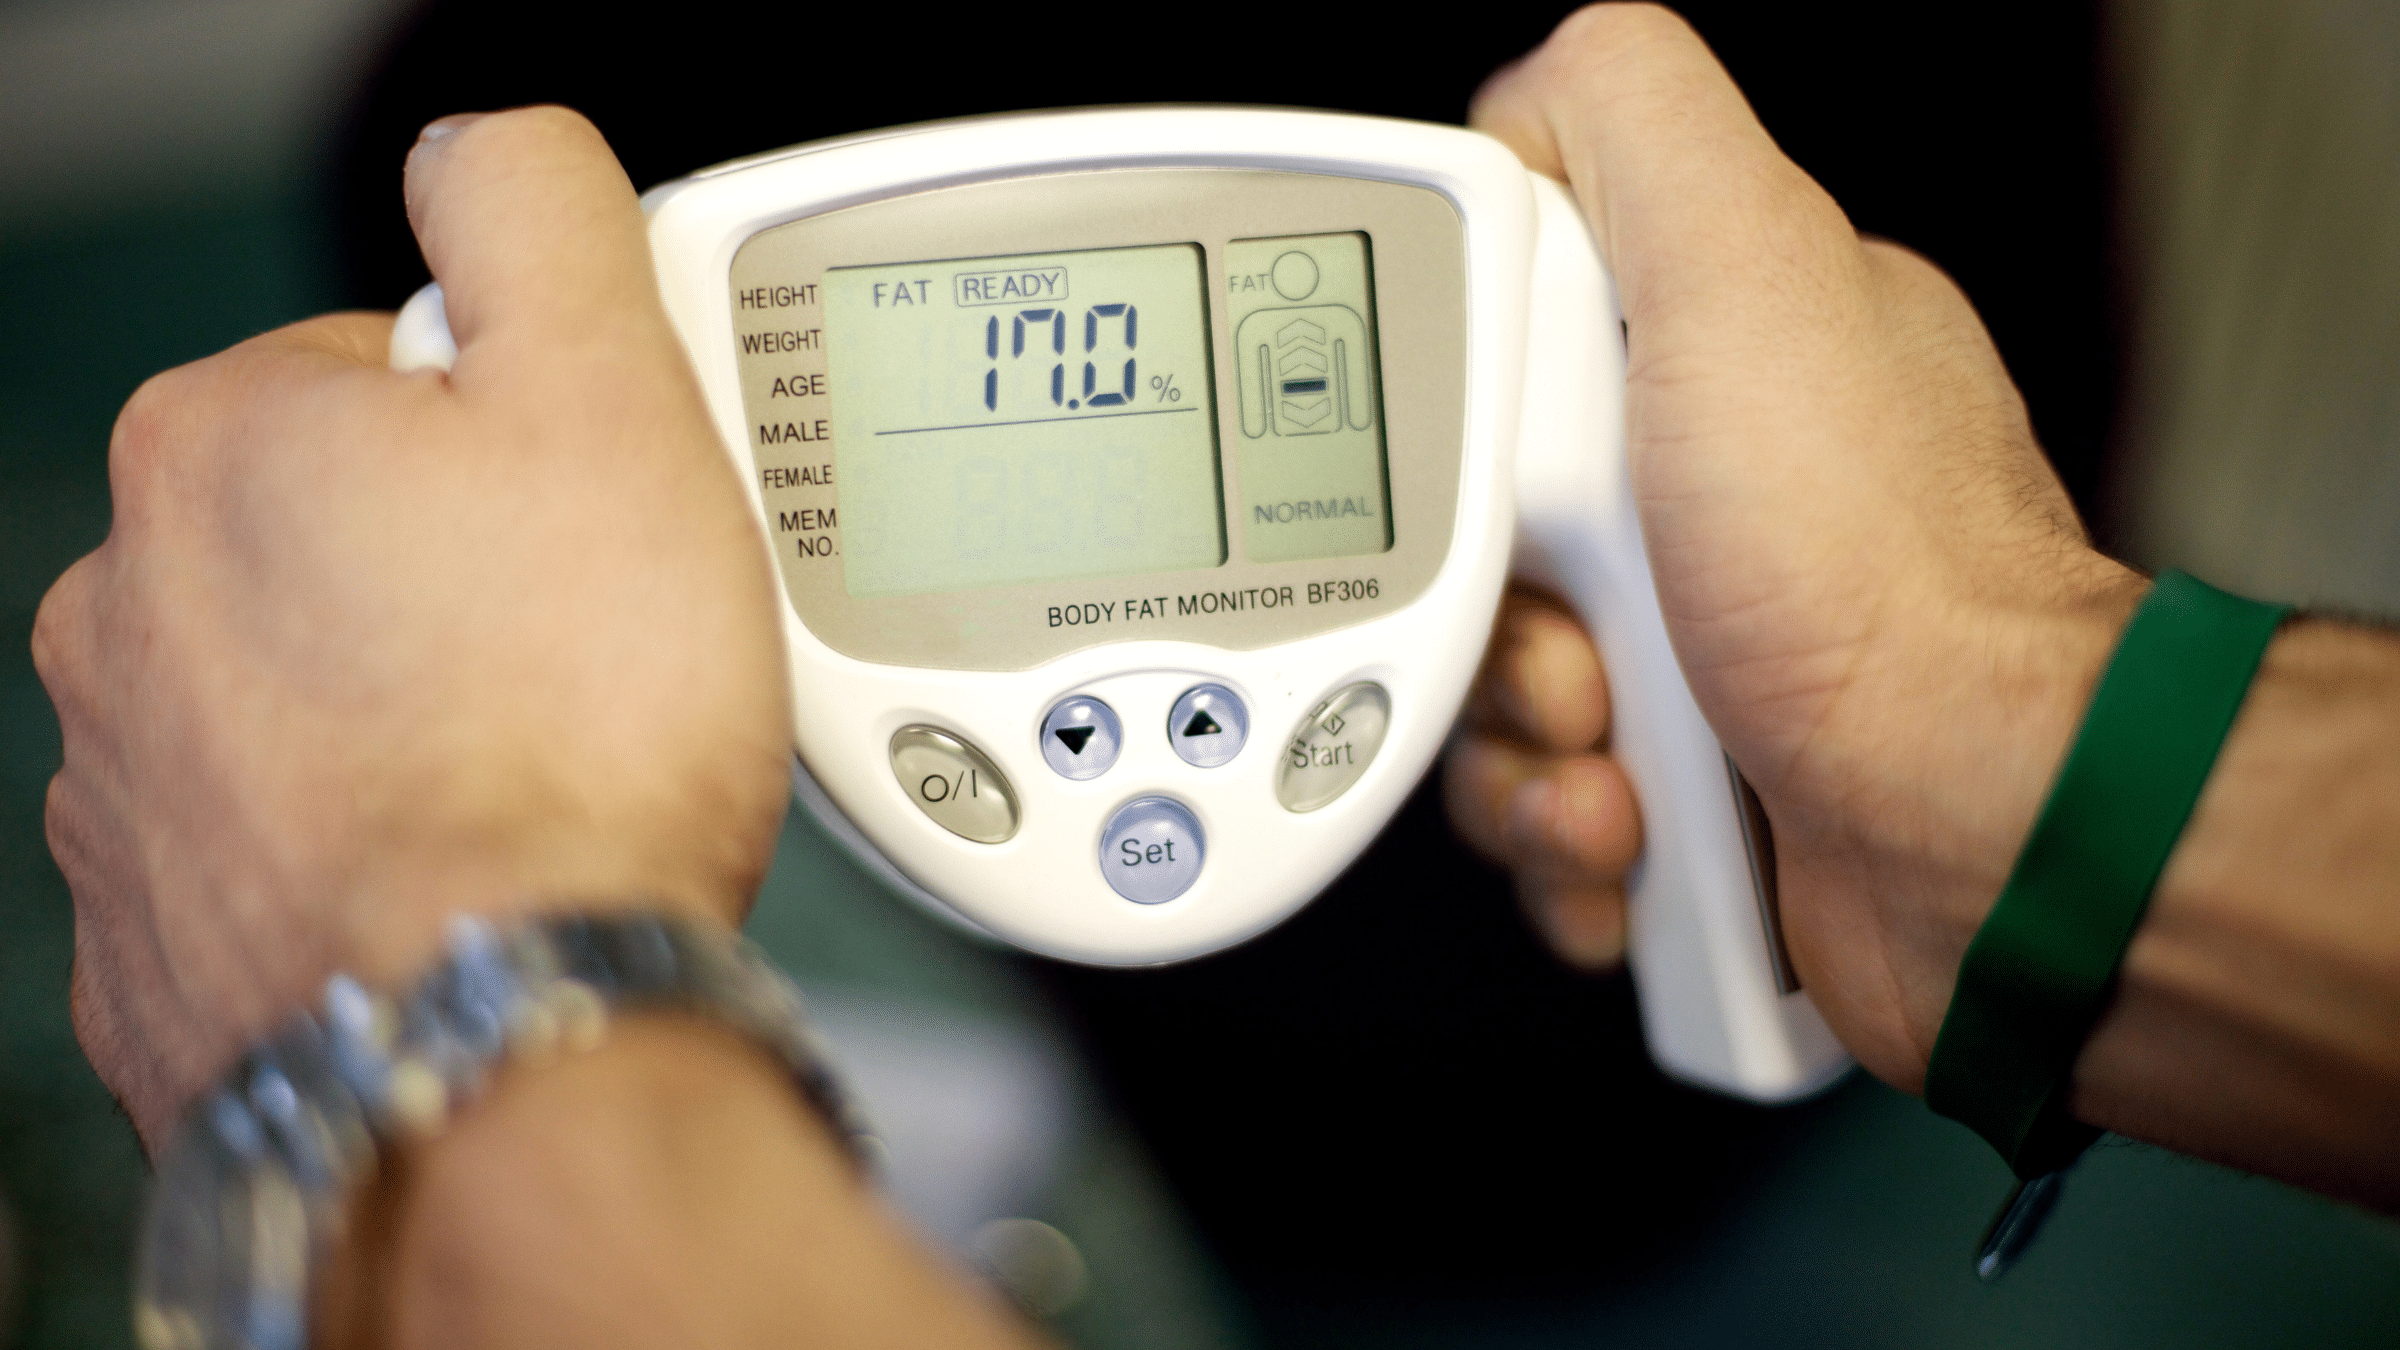 Which method is more accurate for body fat measurement: bioelectrical  impedance monitors or calipers? - Quora